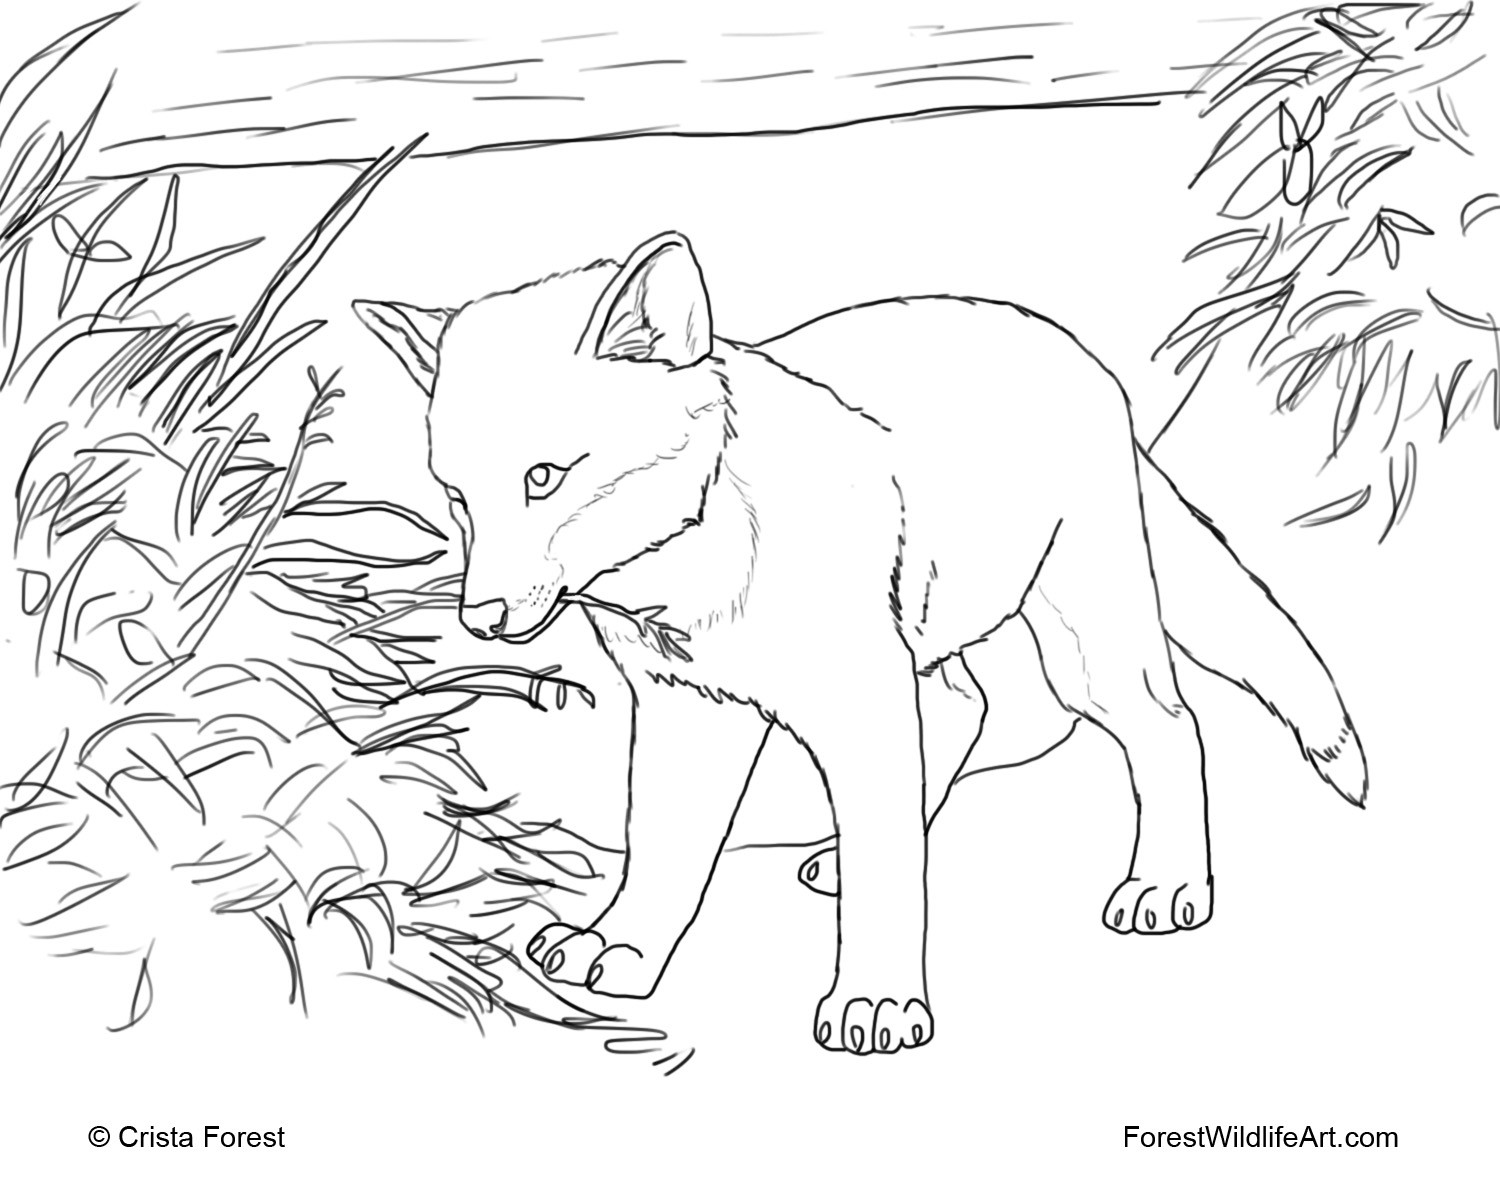 Coloring Pages For Kids Fox
 Crista Forest s Animals & Art Coloring Book Page Red